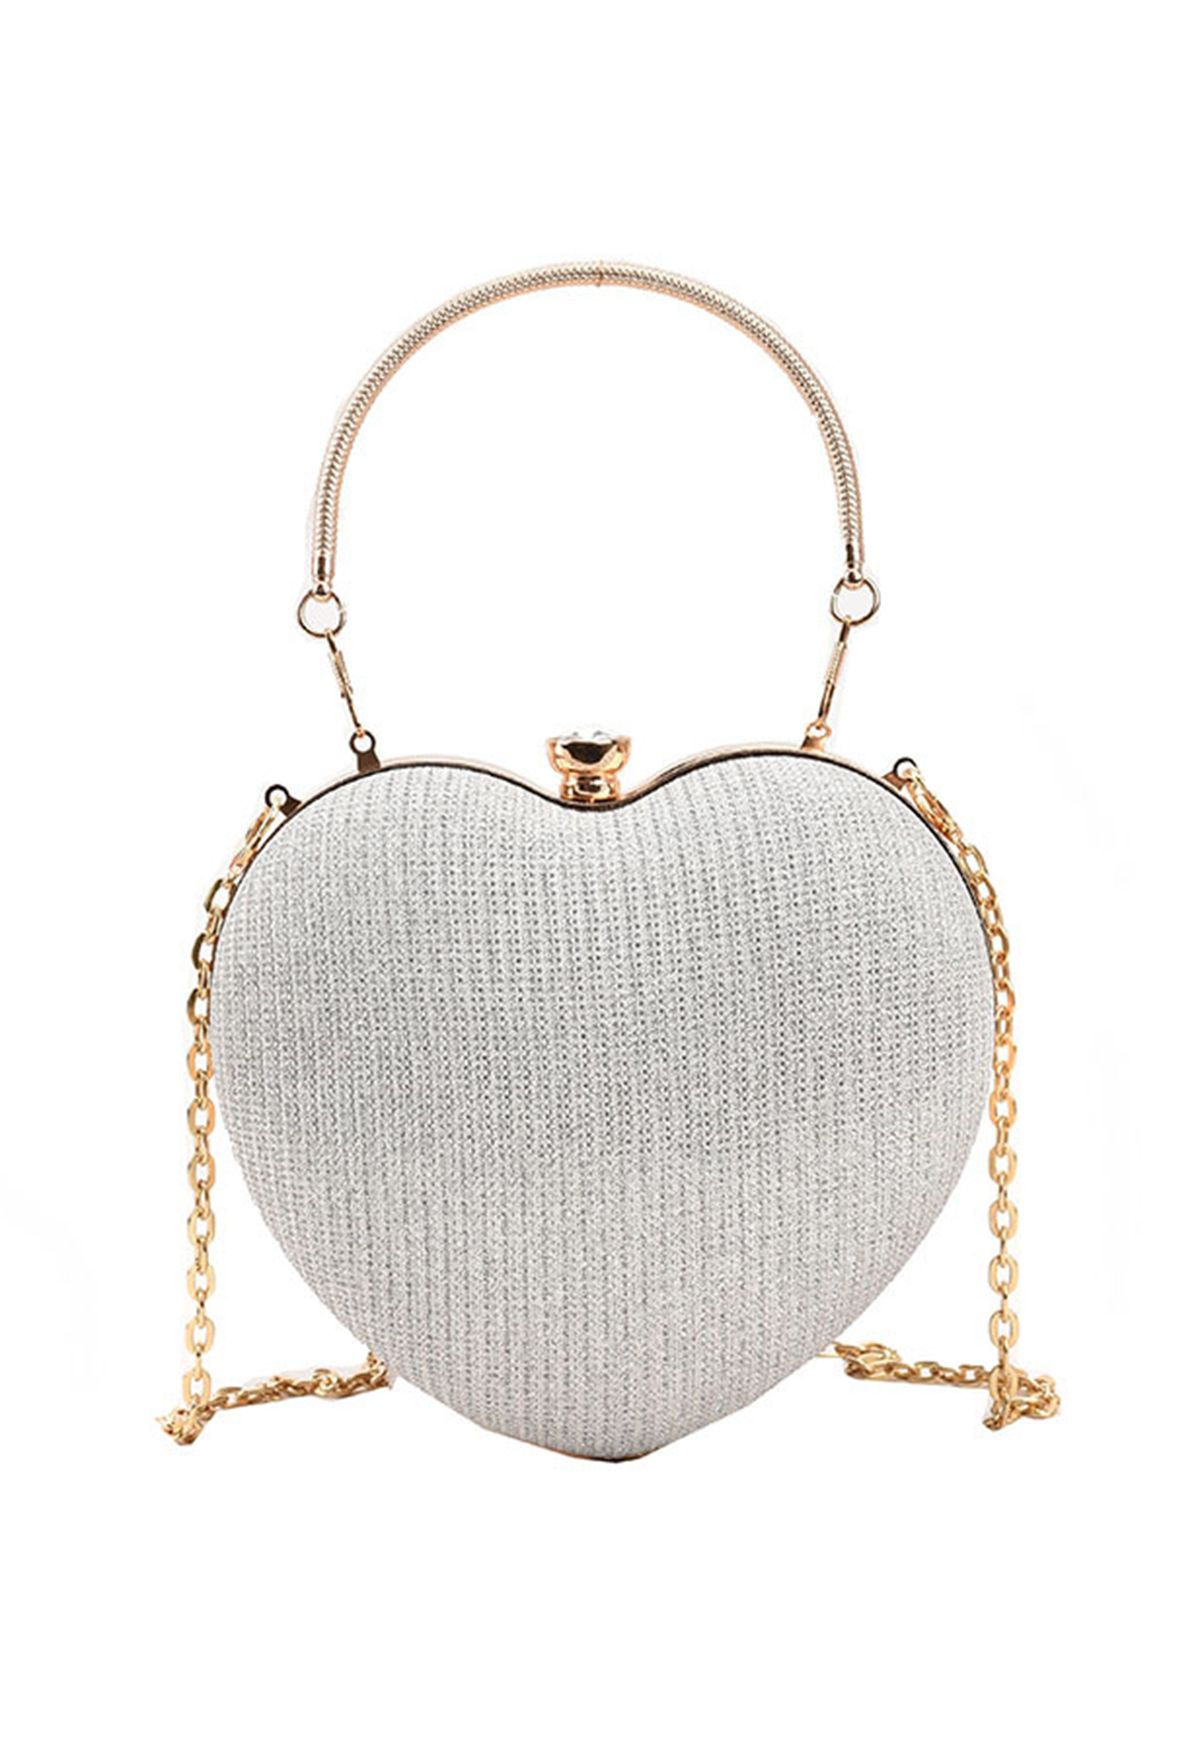 Gleaming Heart Shape Clutch Handbag in Silver - Retro, Indie and